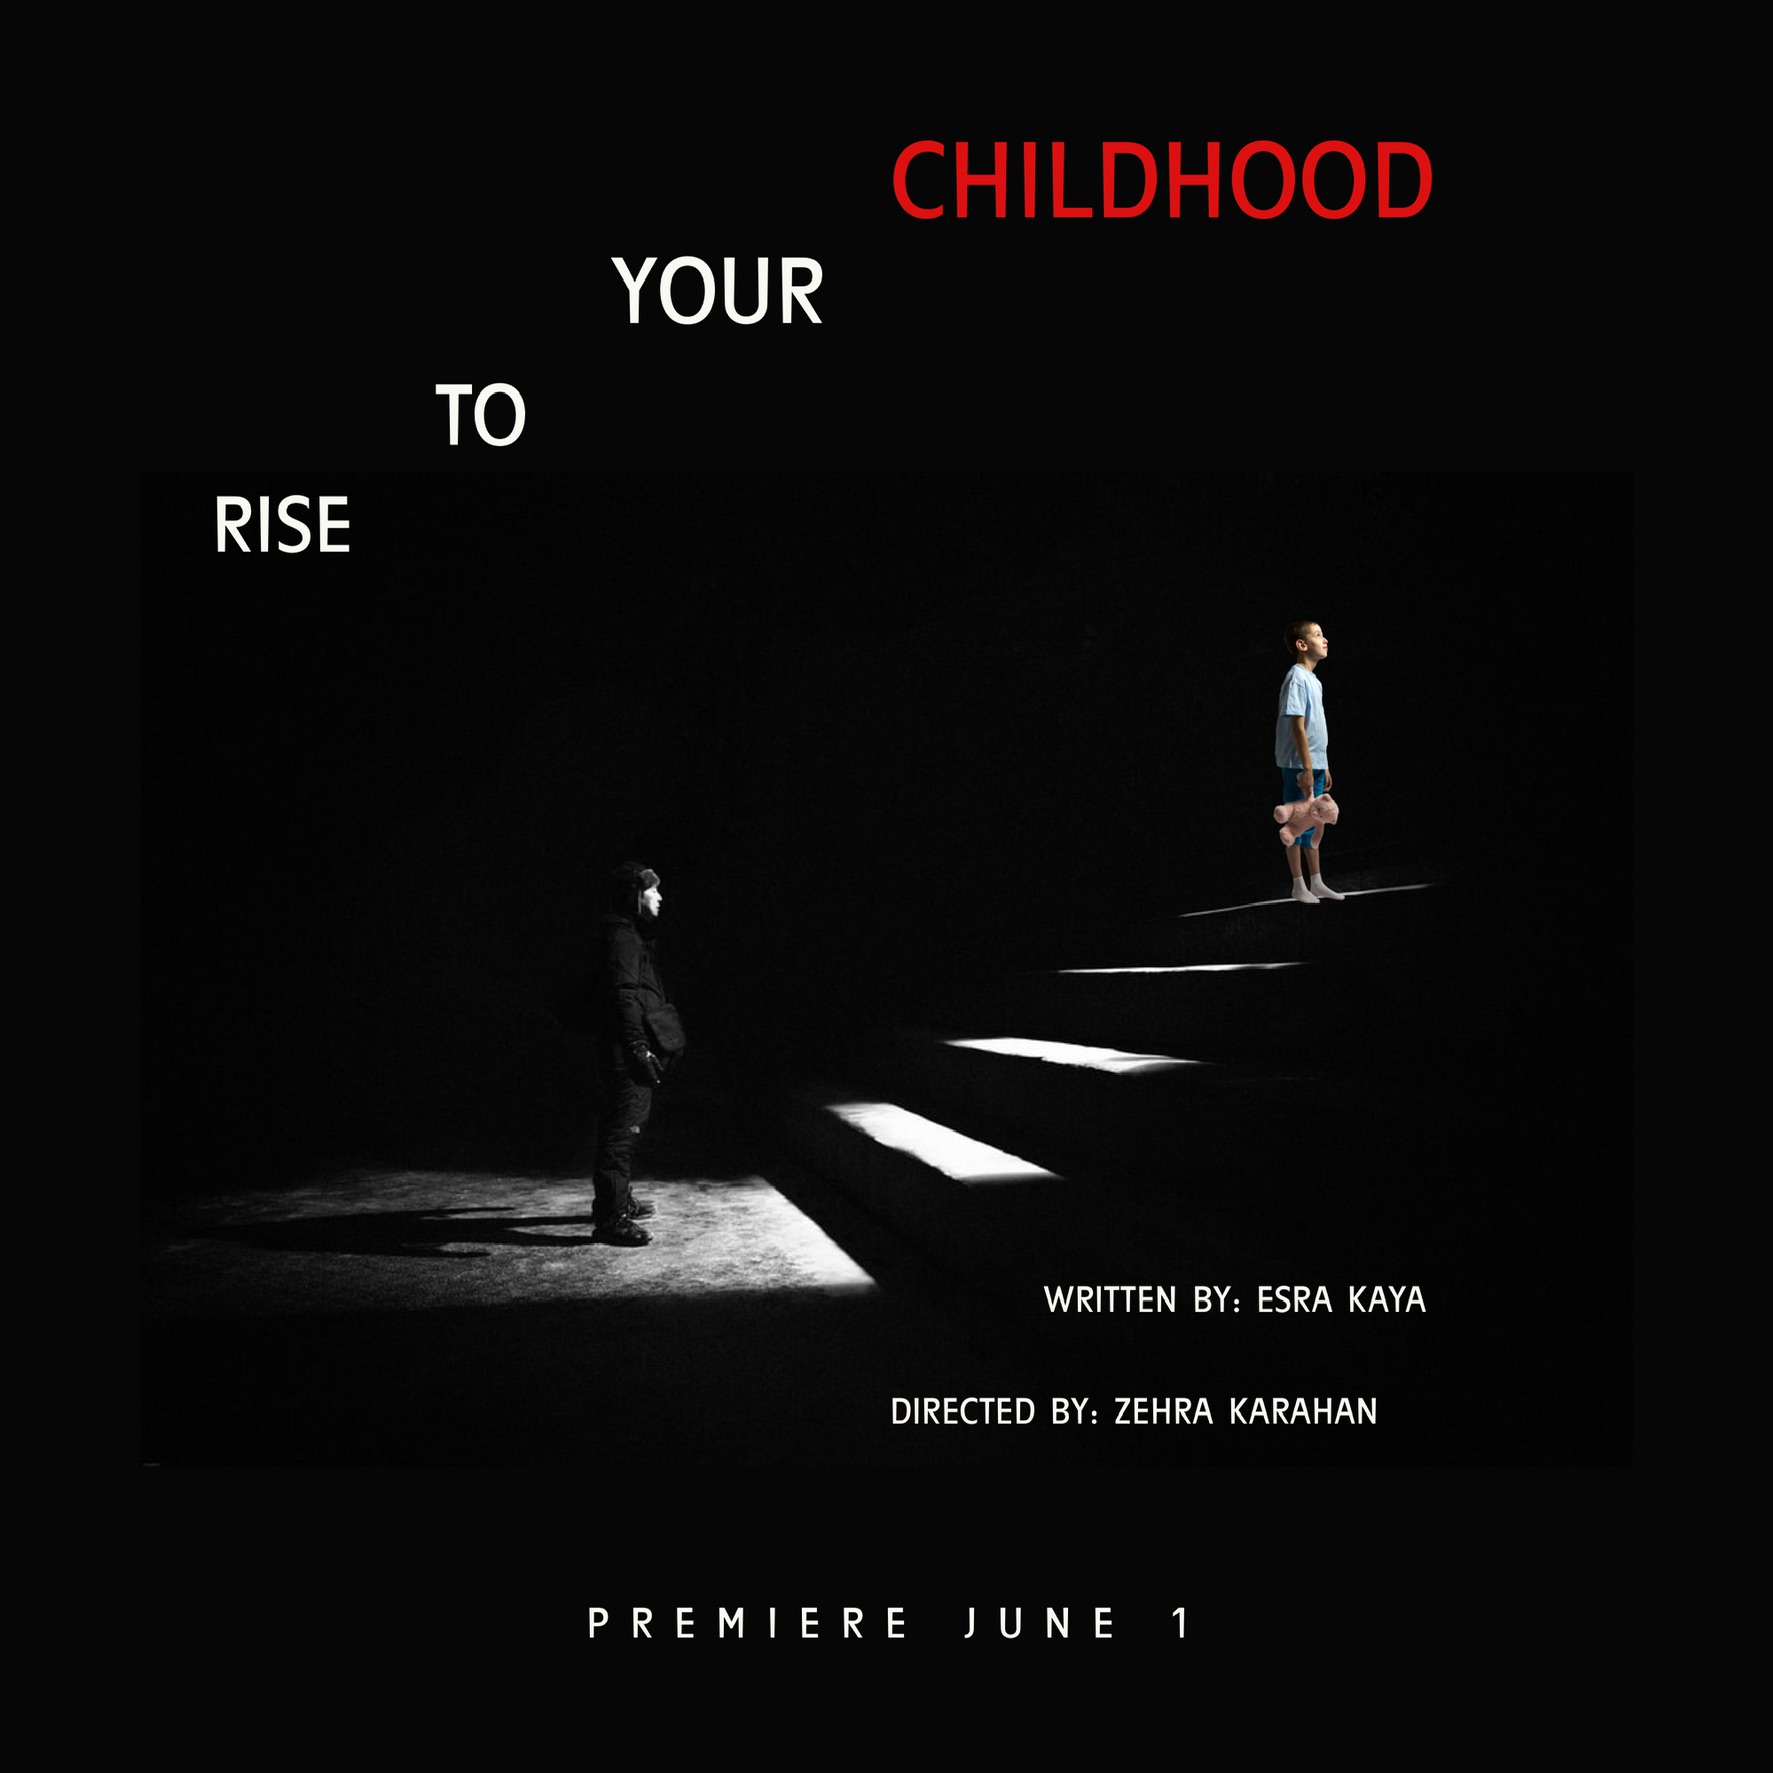 Rise to your Childhood by Zehra Karahan